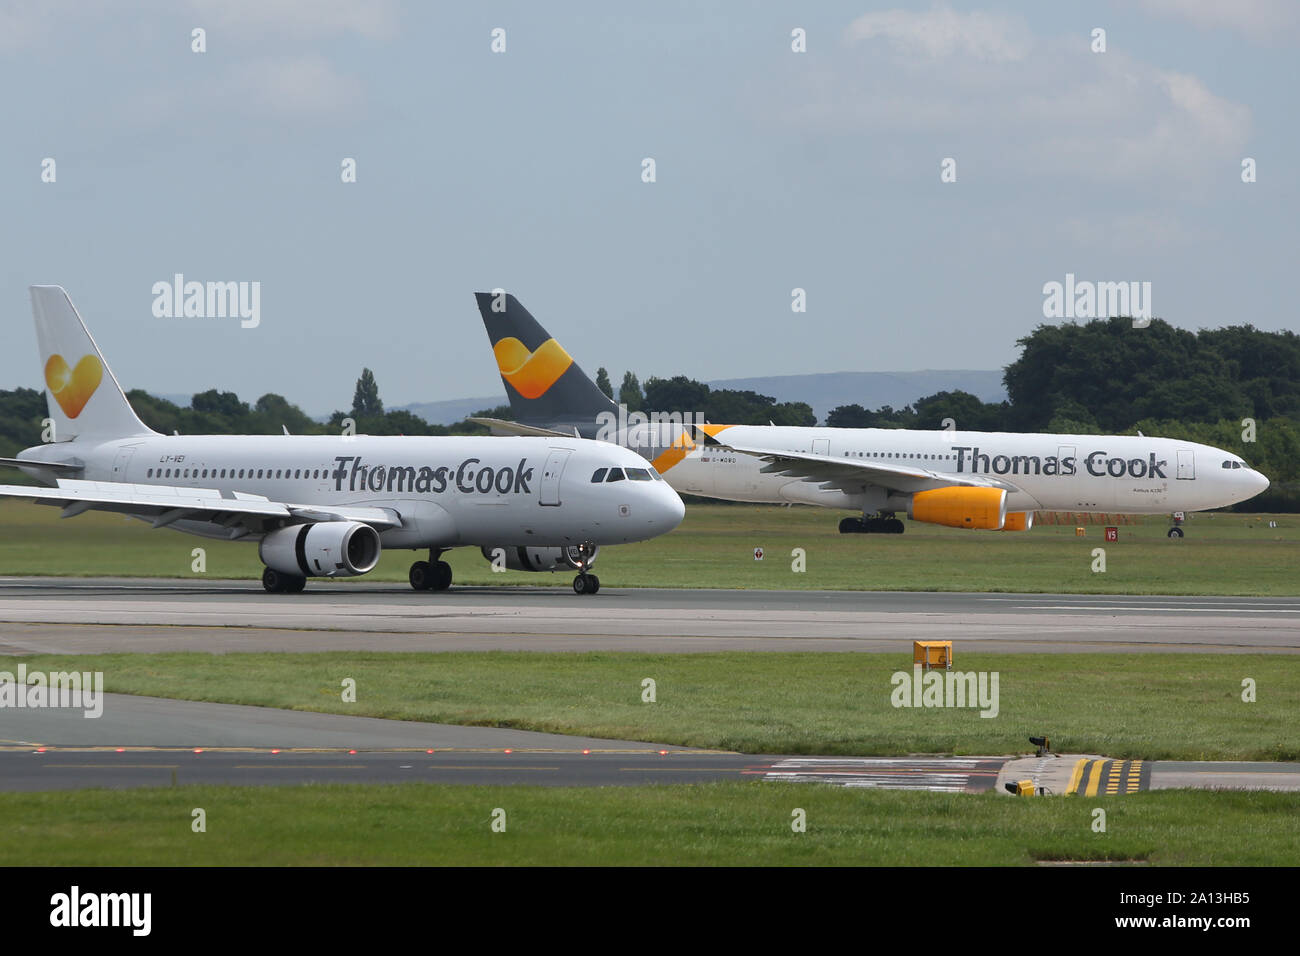 (File images) Thomas Cook aircraft captured at Manchester International Airport, Great Britain. As reported on Monday, 23 Sep 2019, Thomas Cook Group Plc, the 178-year travel company that became one of the U.K.’s best-known brands, has collapsed under a pile of debt, leaving tens of thousands of British tourists stranded across Europe. Stock Photo